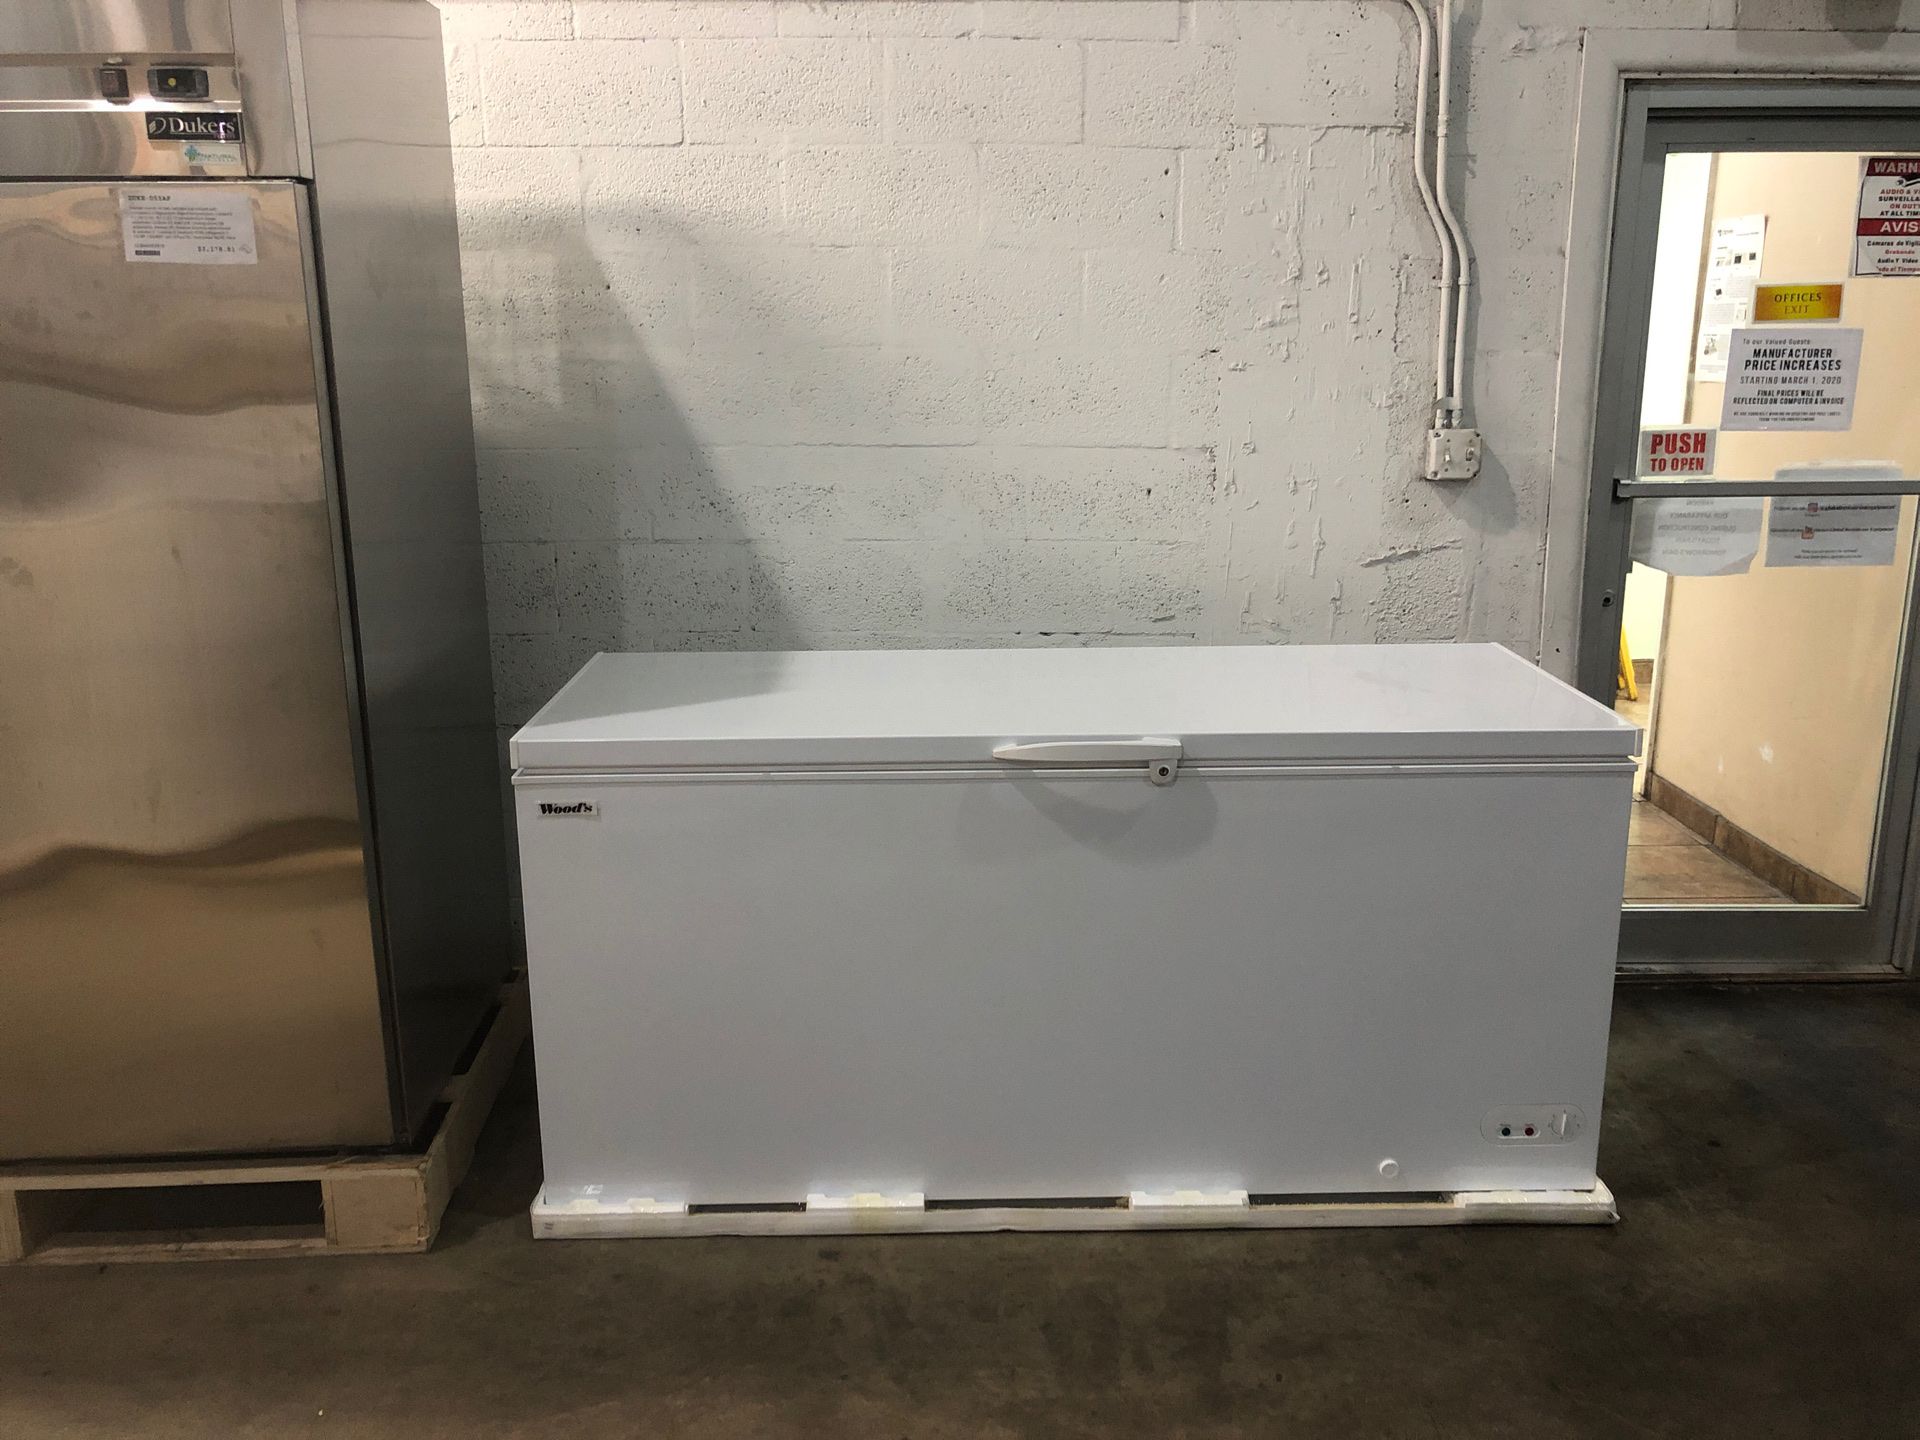 Chest freezer 25 cubic feet (71 inches long)